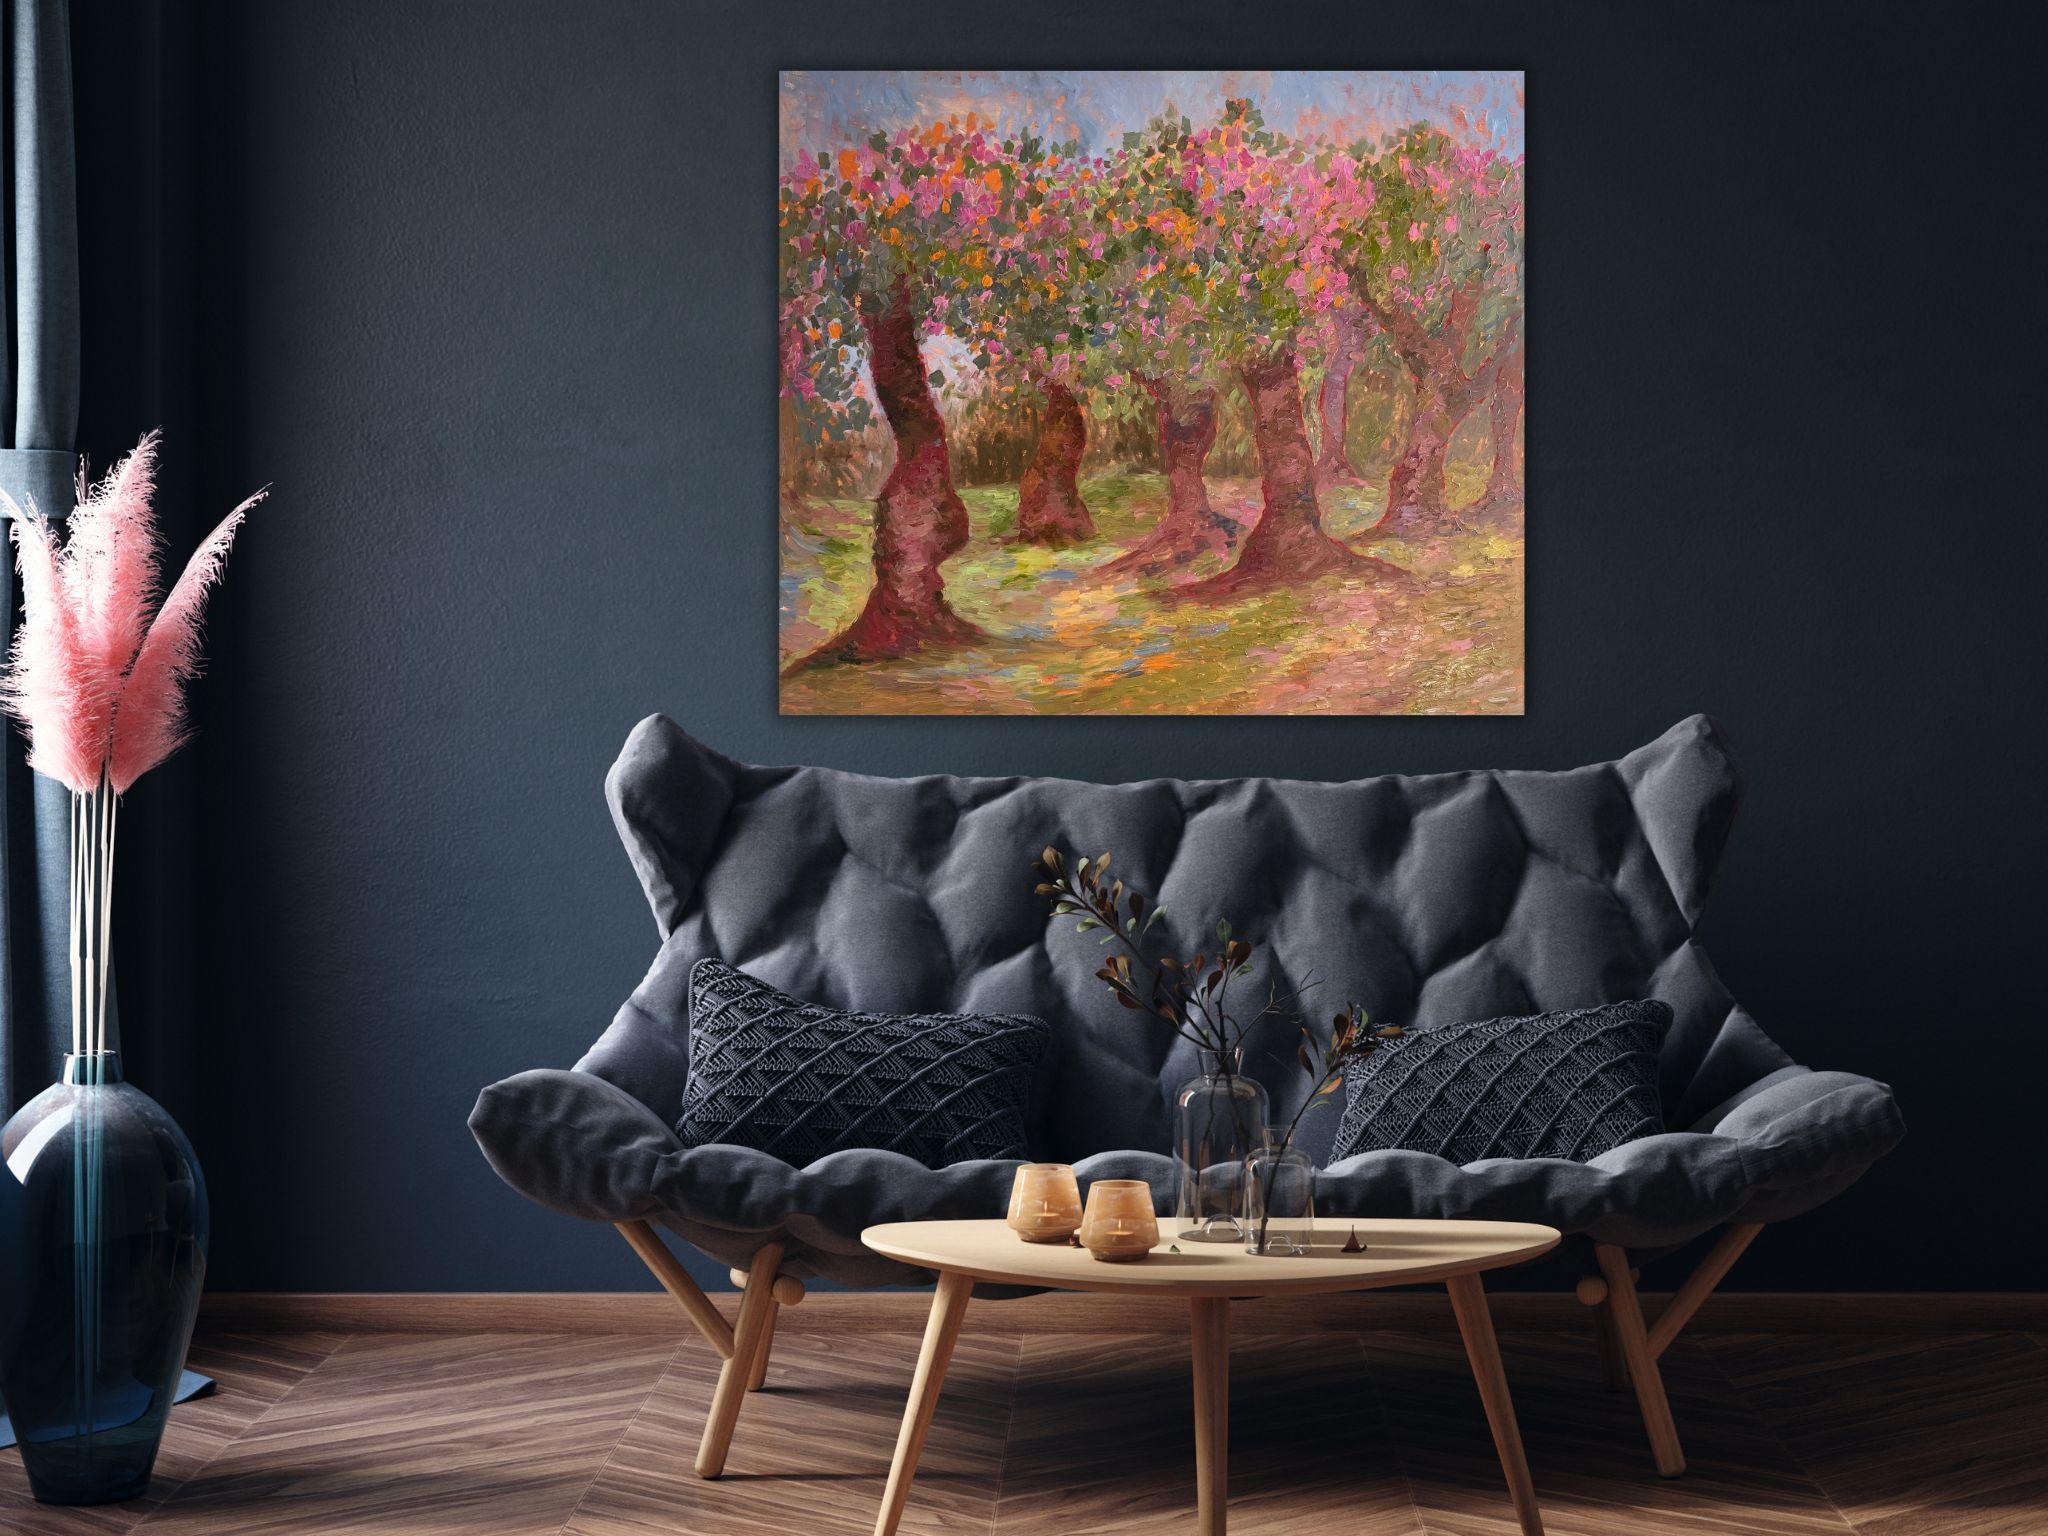 Landscape Painting - APPLES GARDEN, oil on canvas - 40*32 in (100*80cm) For Sale 12